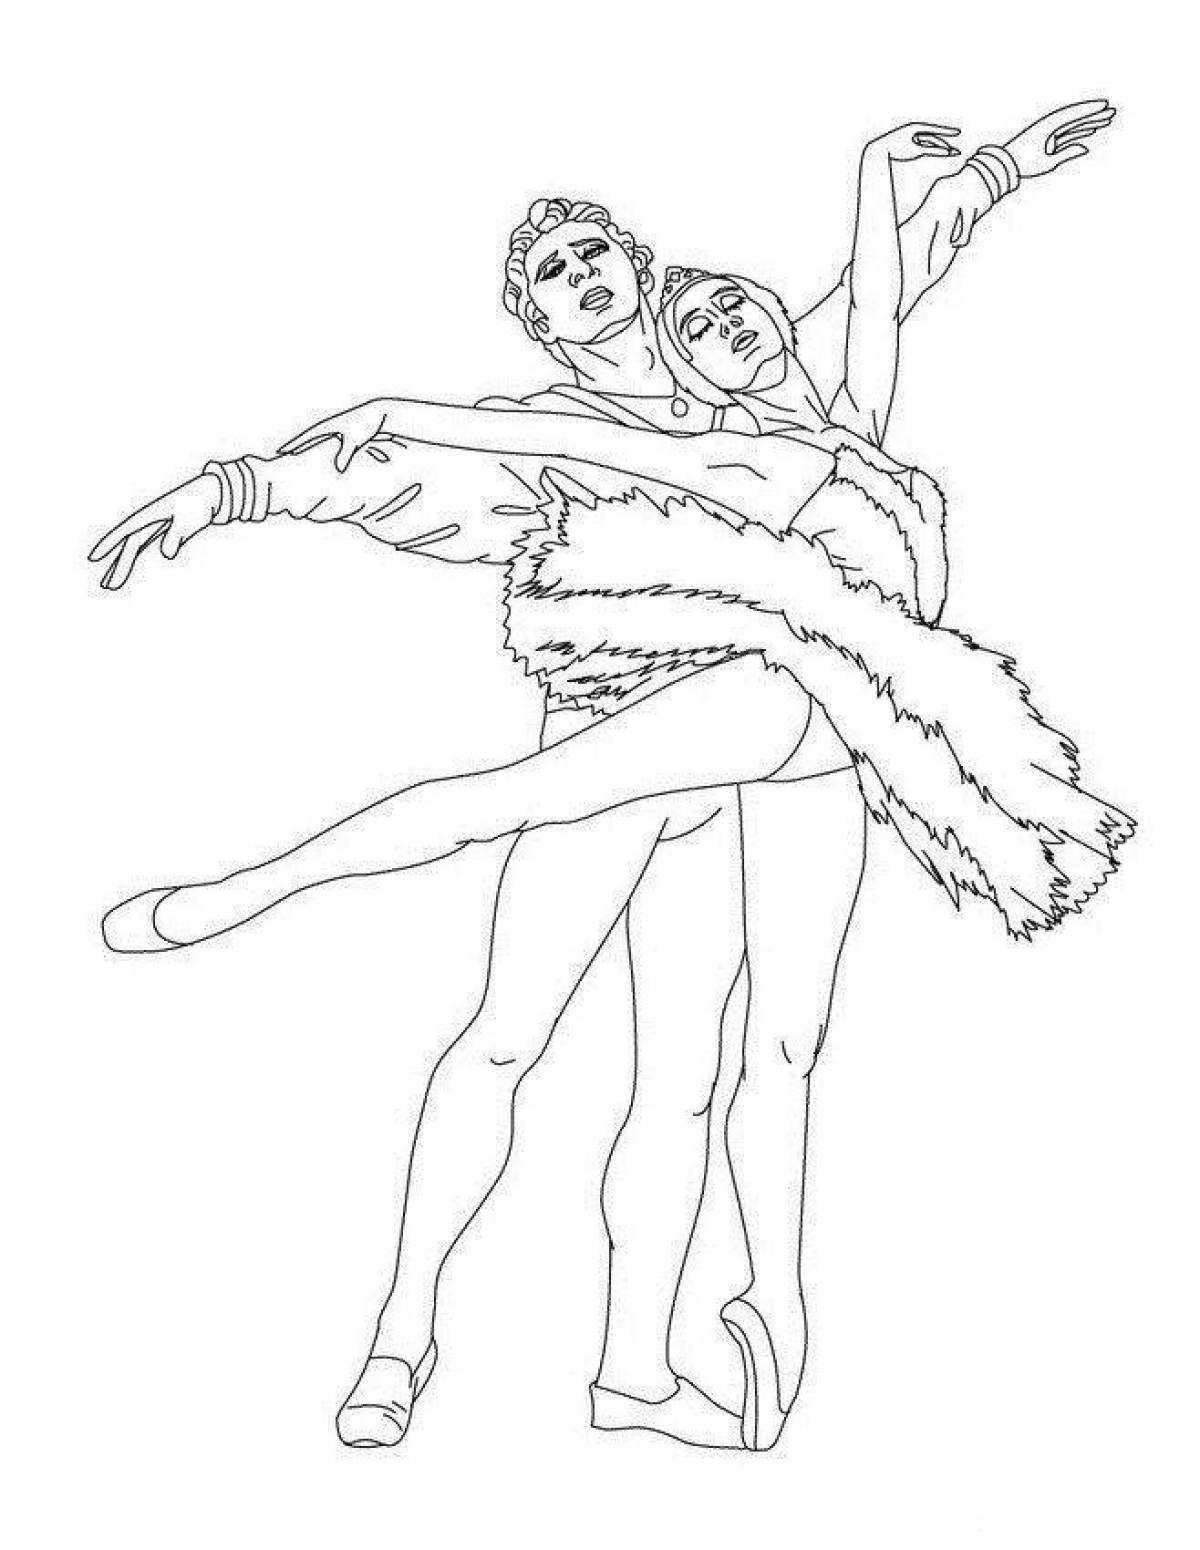 Swan lake awesome coloring page